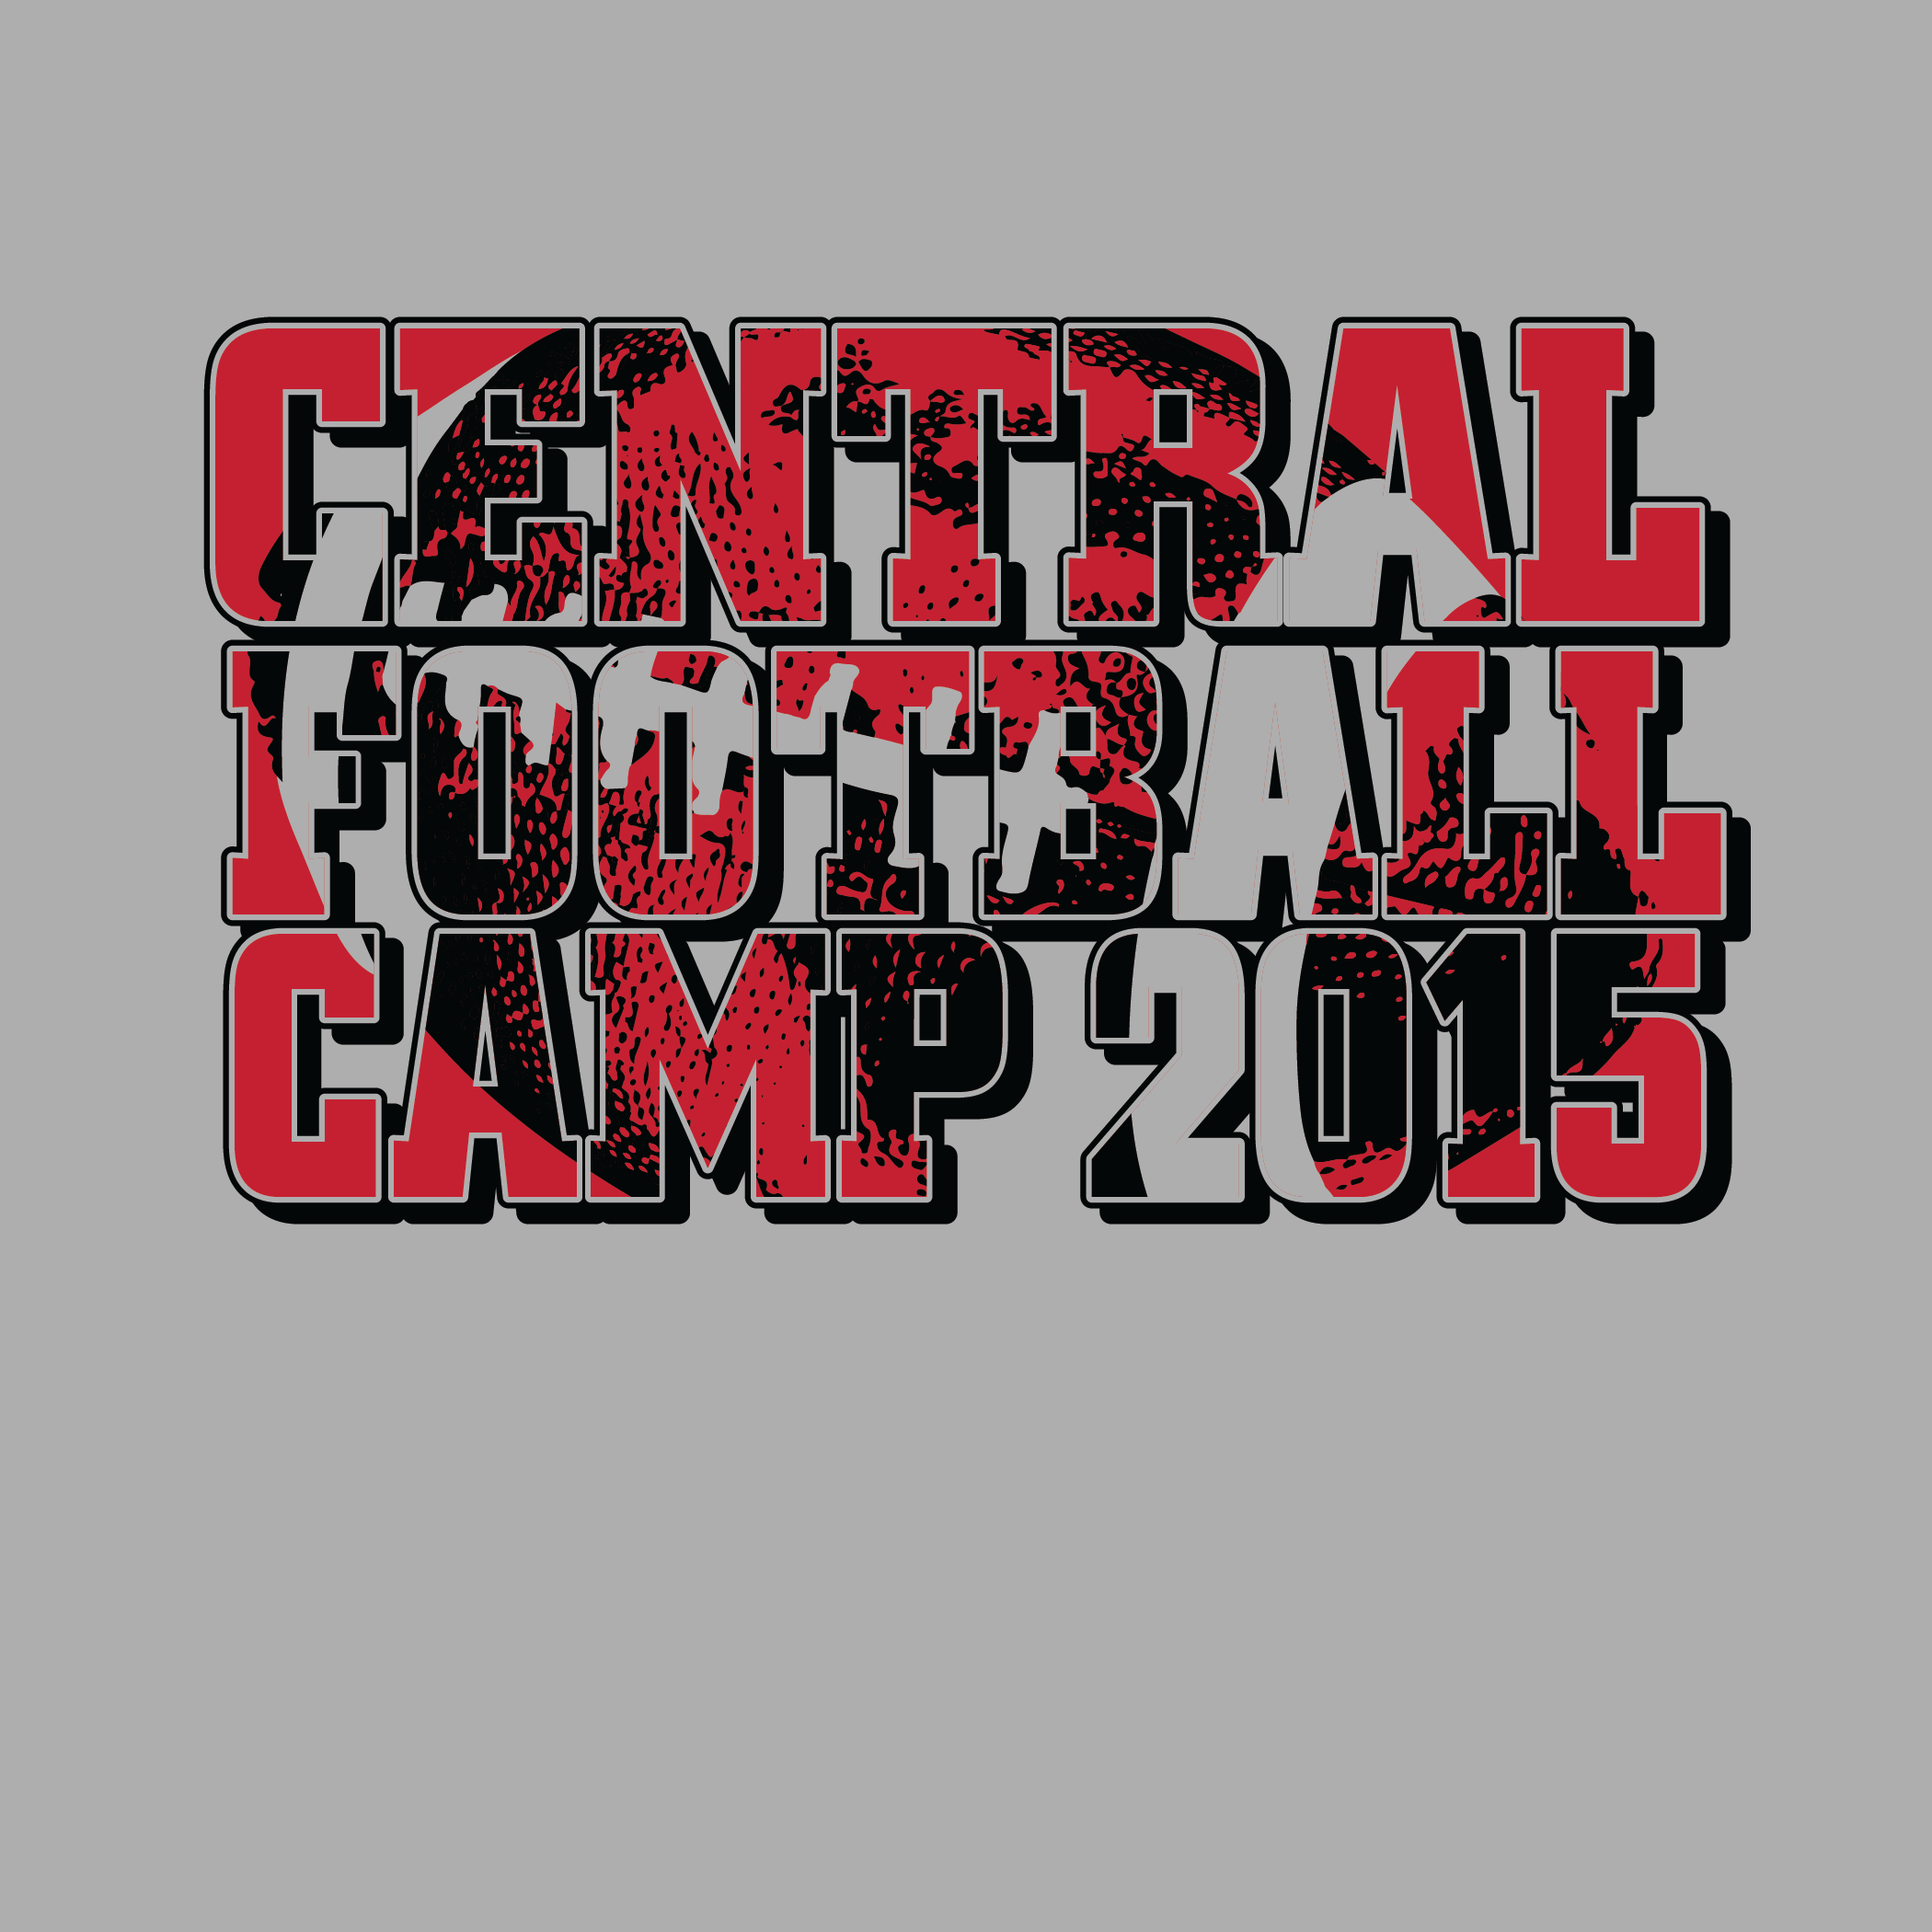 Central-High-School-Football-Camp-2015-02.png